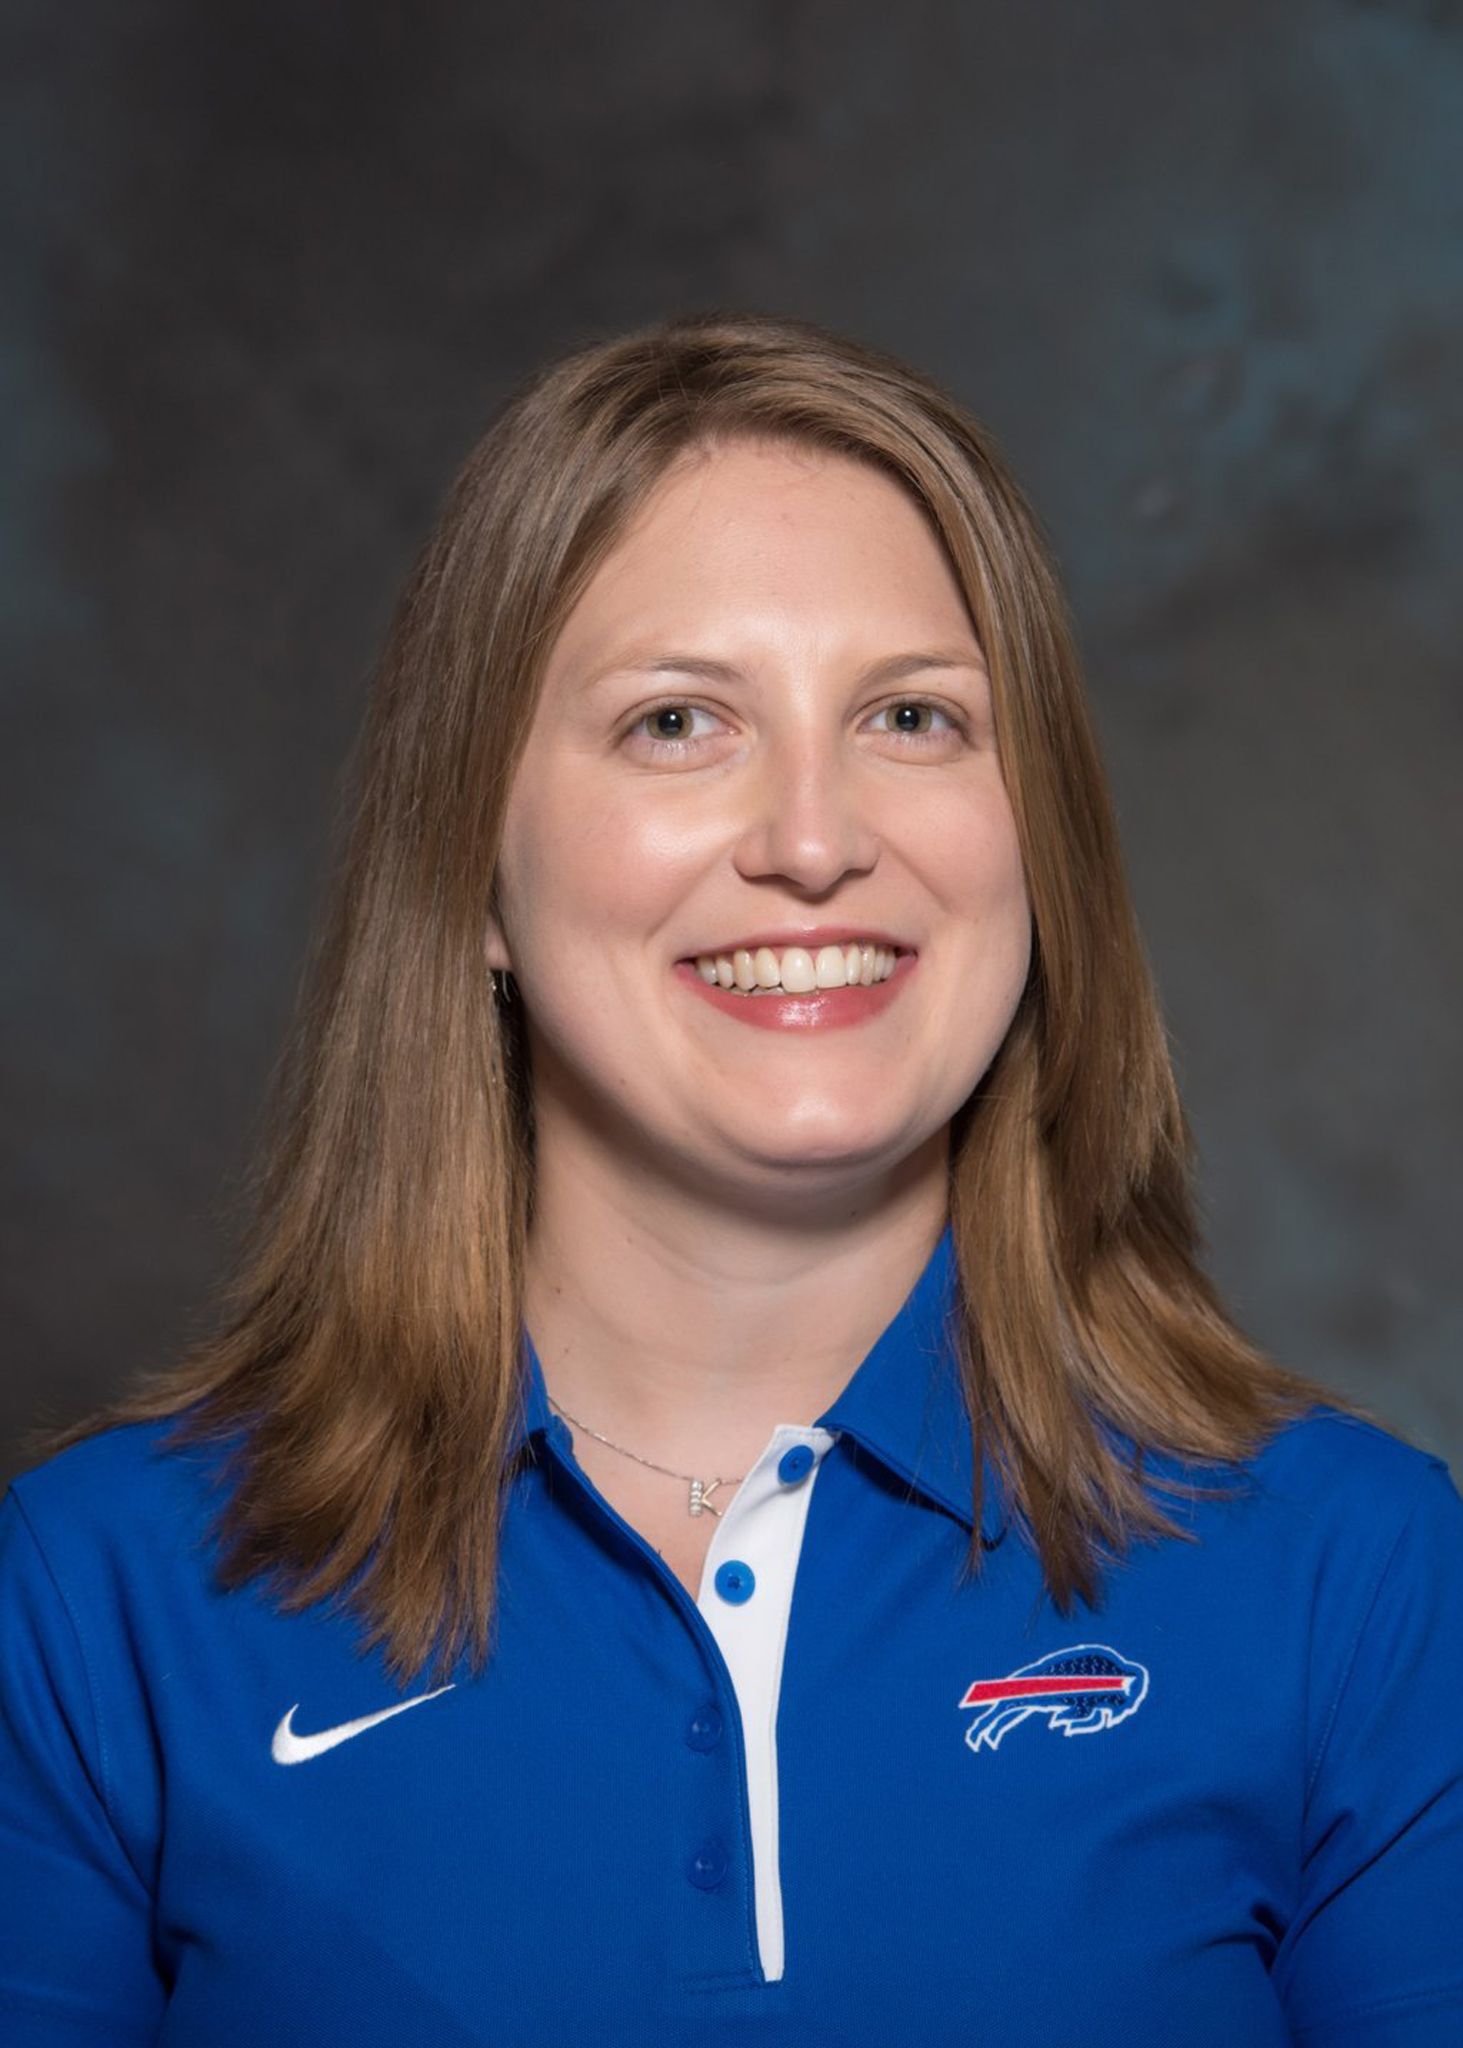 Buffalo Bills appoint NFL's first female full-time coach